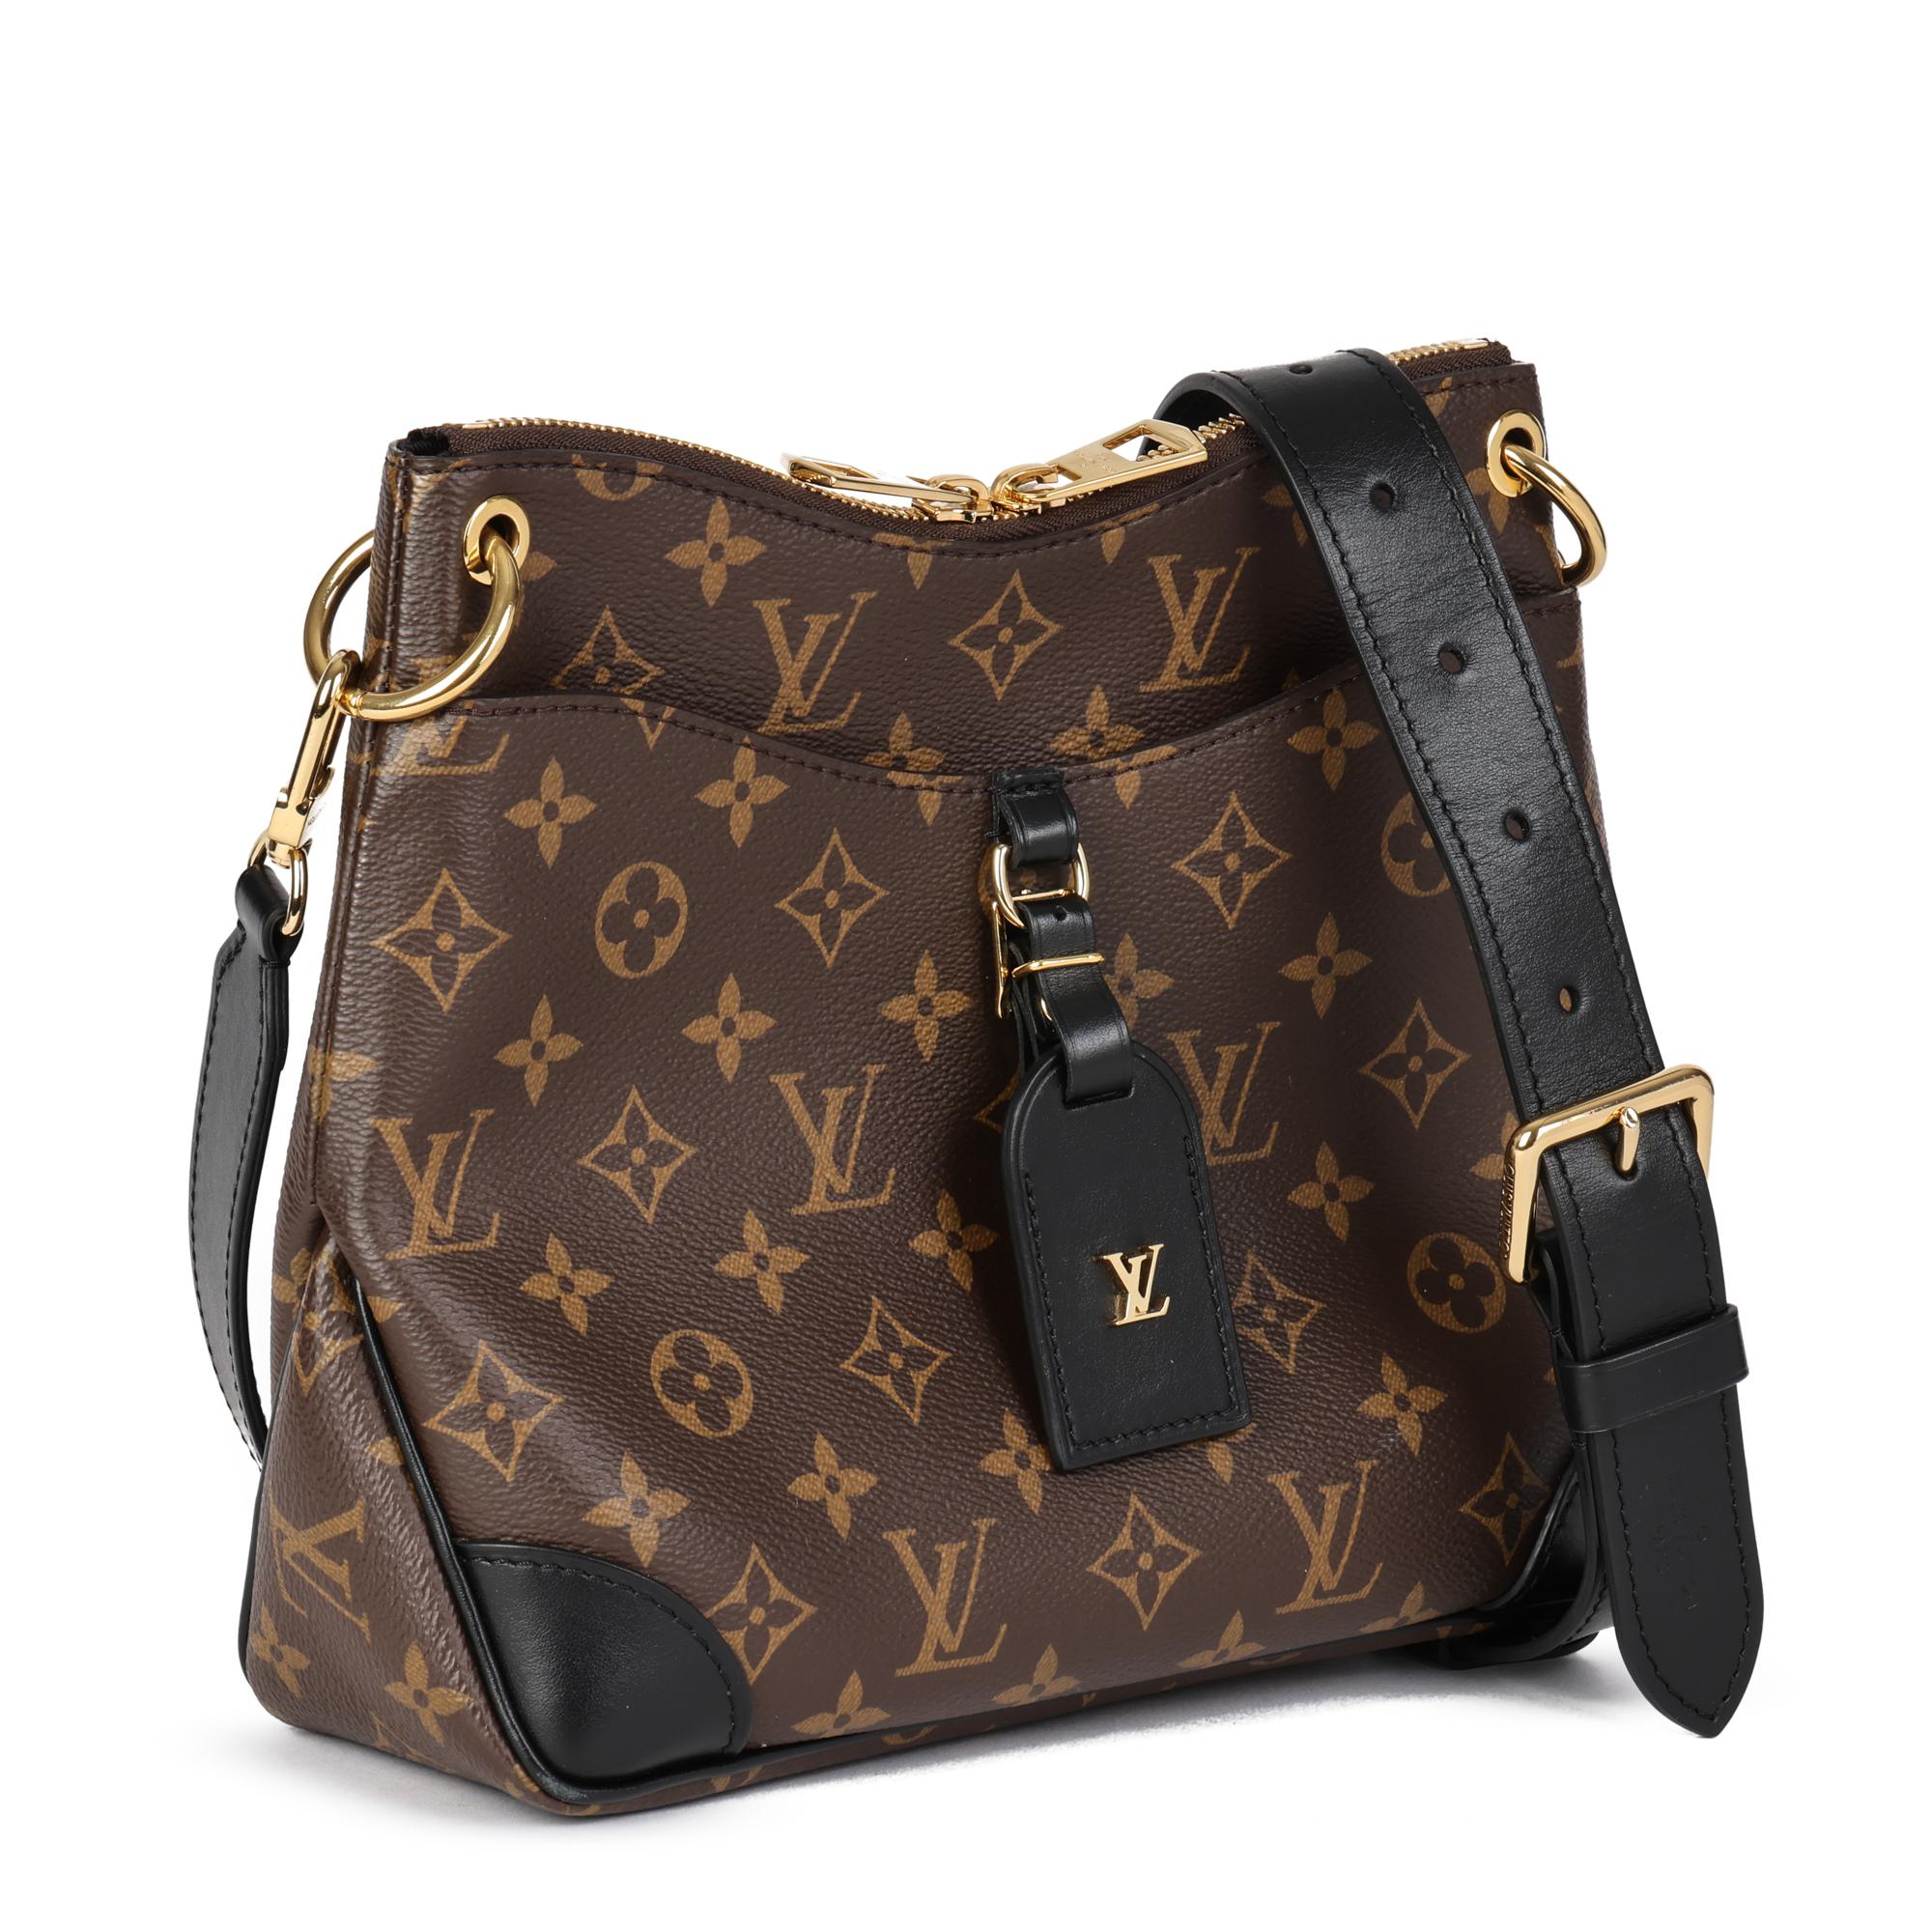 Louis Vuitton BROWN MONOGRAM COATED CANVAS & BLACK CALFSKIN LEATHER ODEON PM

CONDITION NOTES
The exterior is in excellent condition with minimal signs of use.
The interior is in excellent condition with light signs of use.
The hardware is in